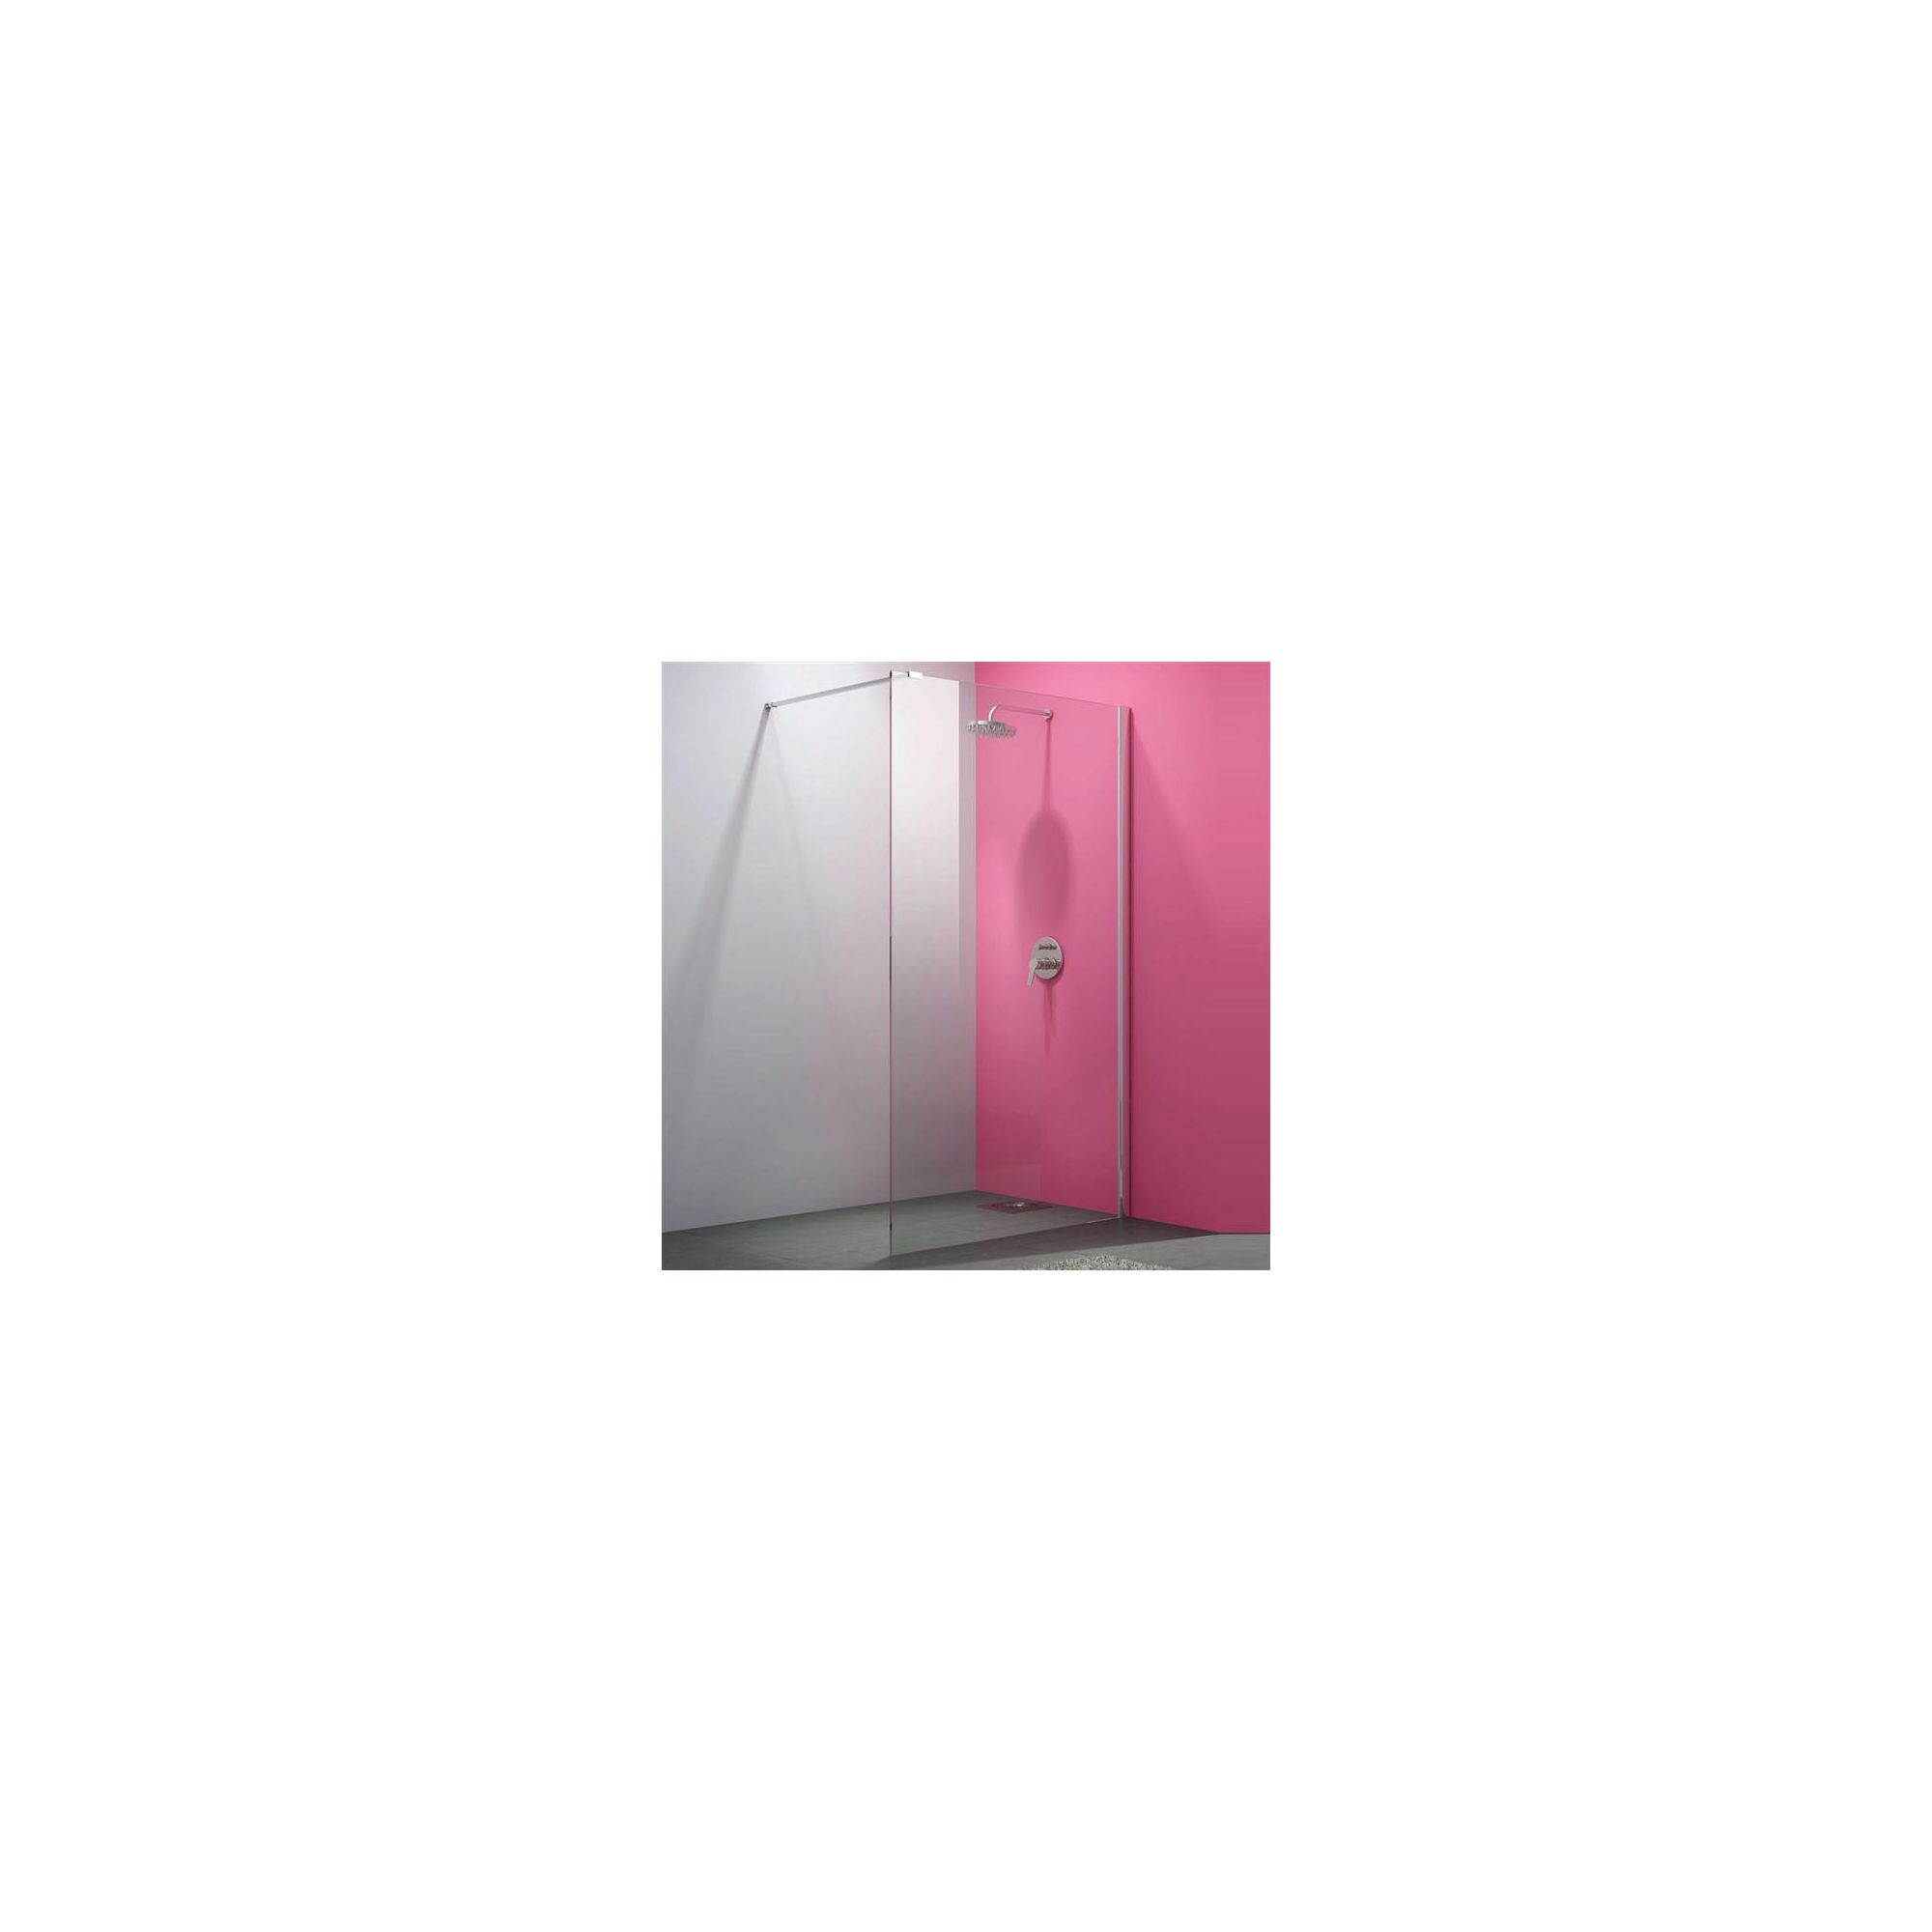 Merlyn Vivid Eight Wet Room Shower Enclosure, 1200mm x 900mm, Low Profile Tray, 8mm Glass at Tesco Direct